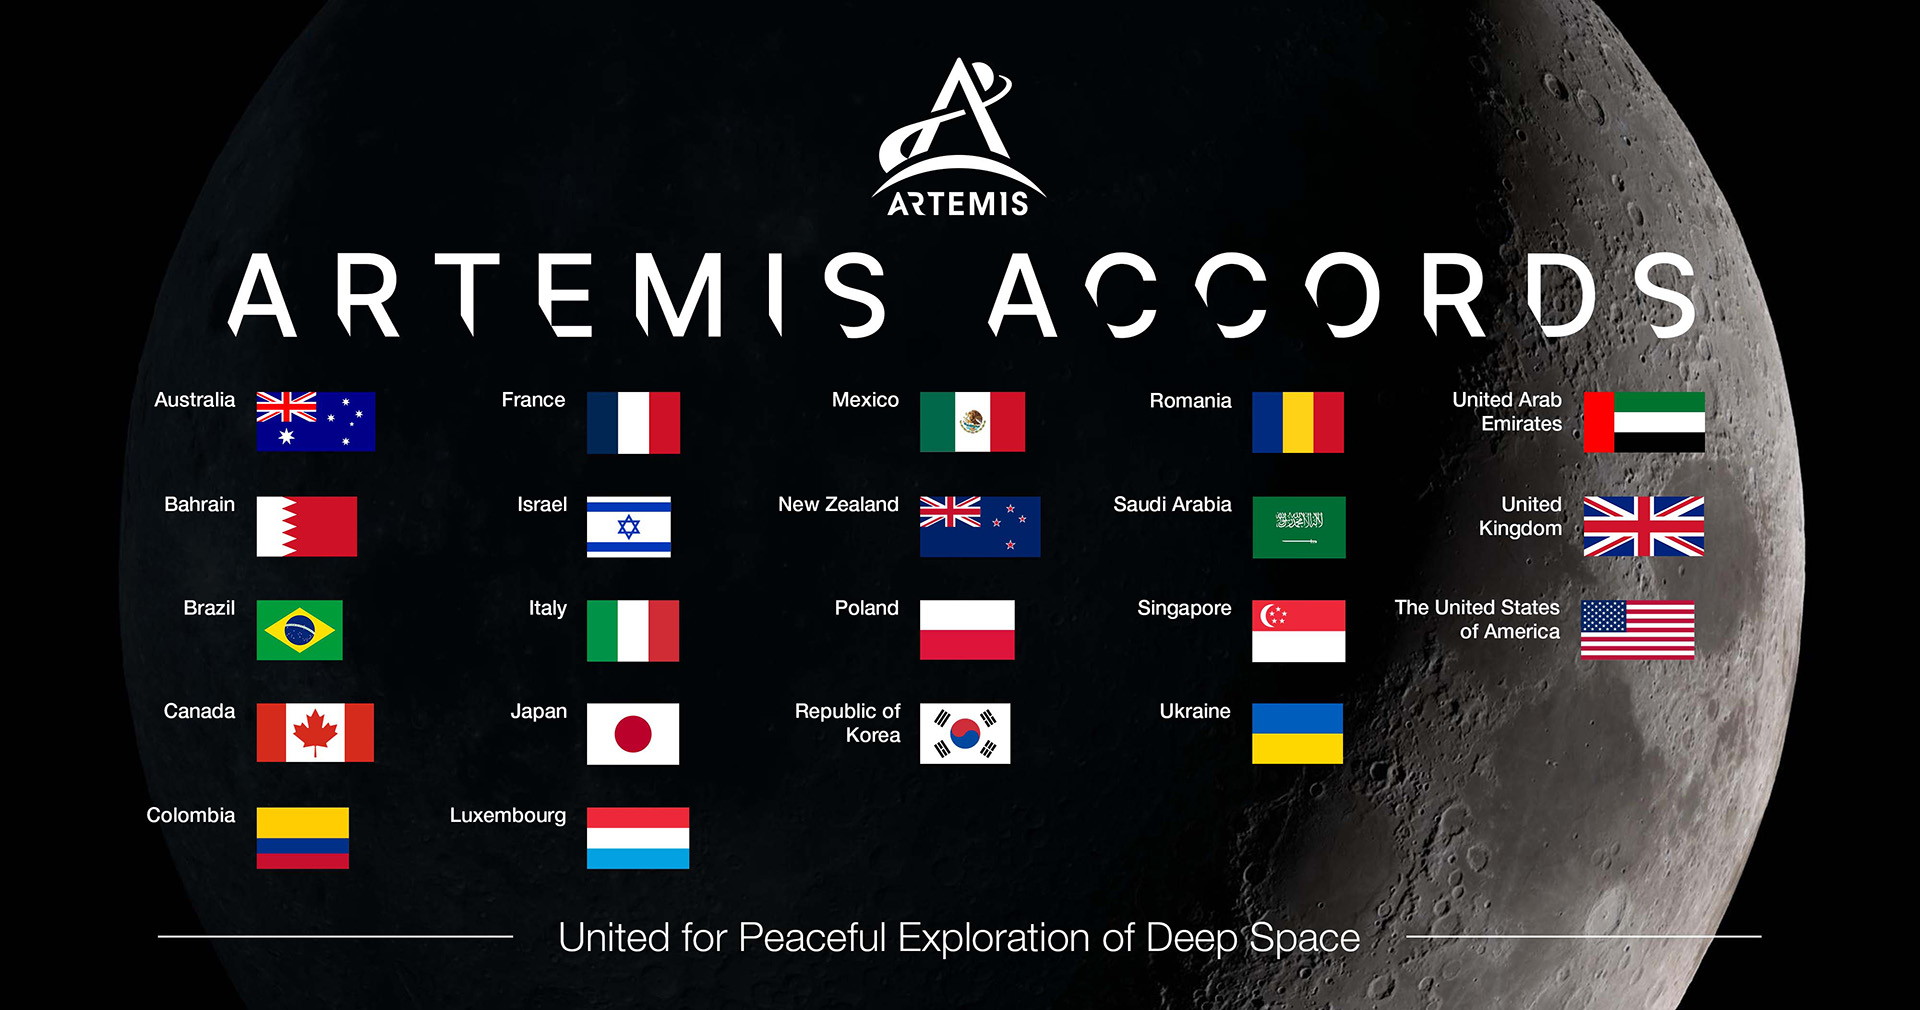 Artemis Accords: An Alliance to Take the World, Not Just the United States, to the Moon and Beyond